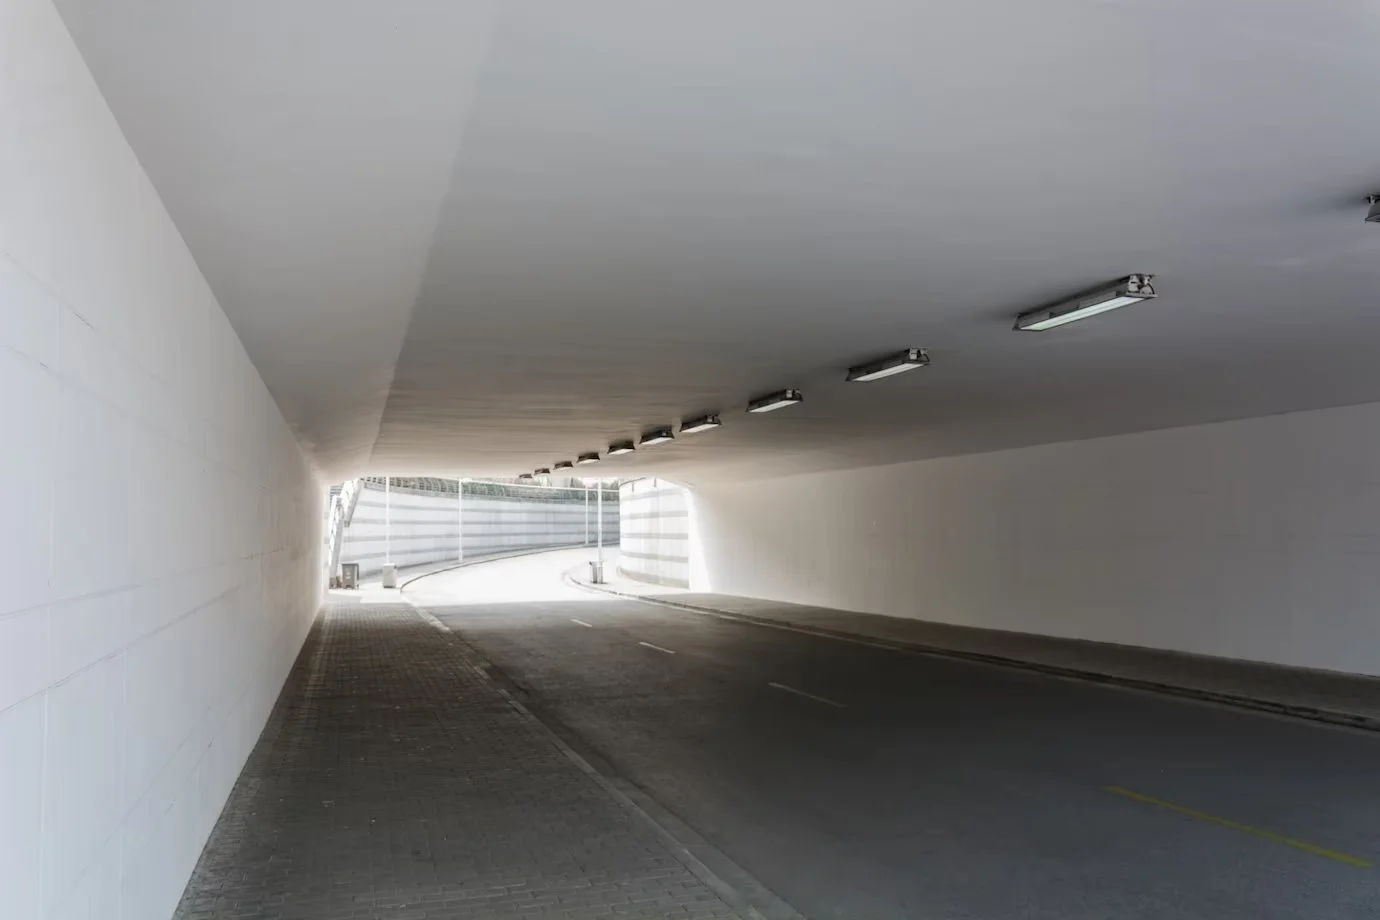 Road tunnel with white painted walls and ceiling